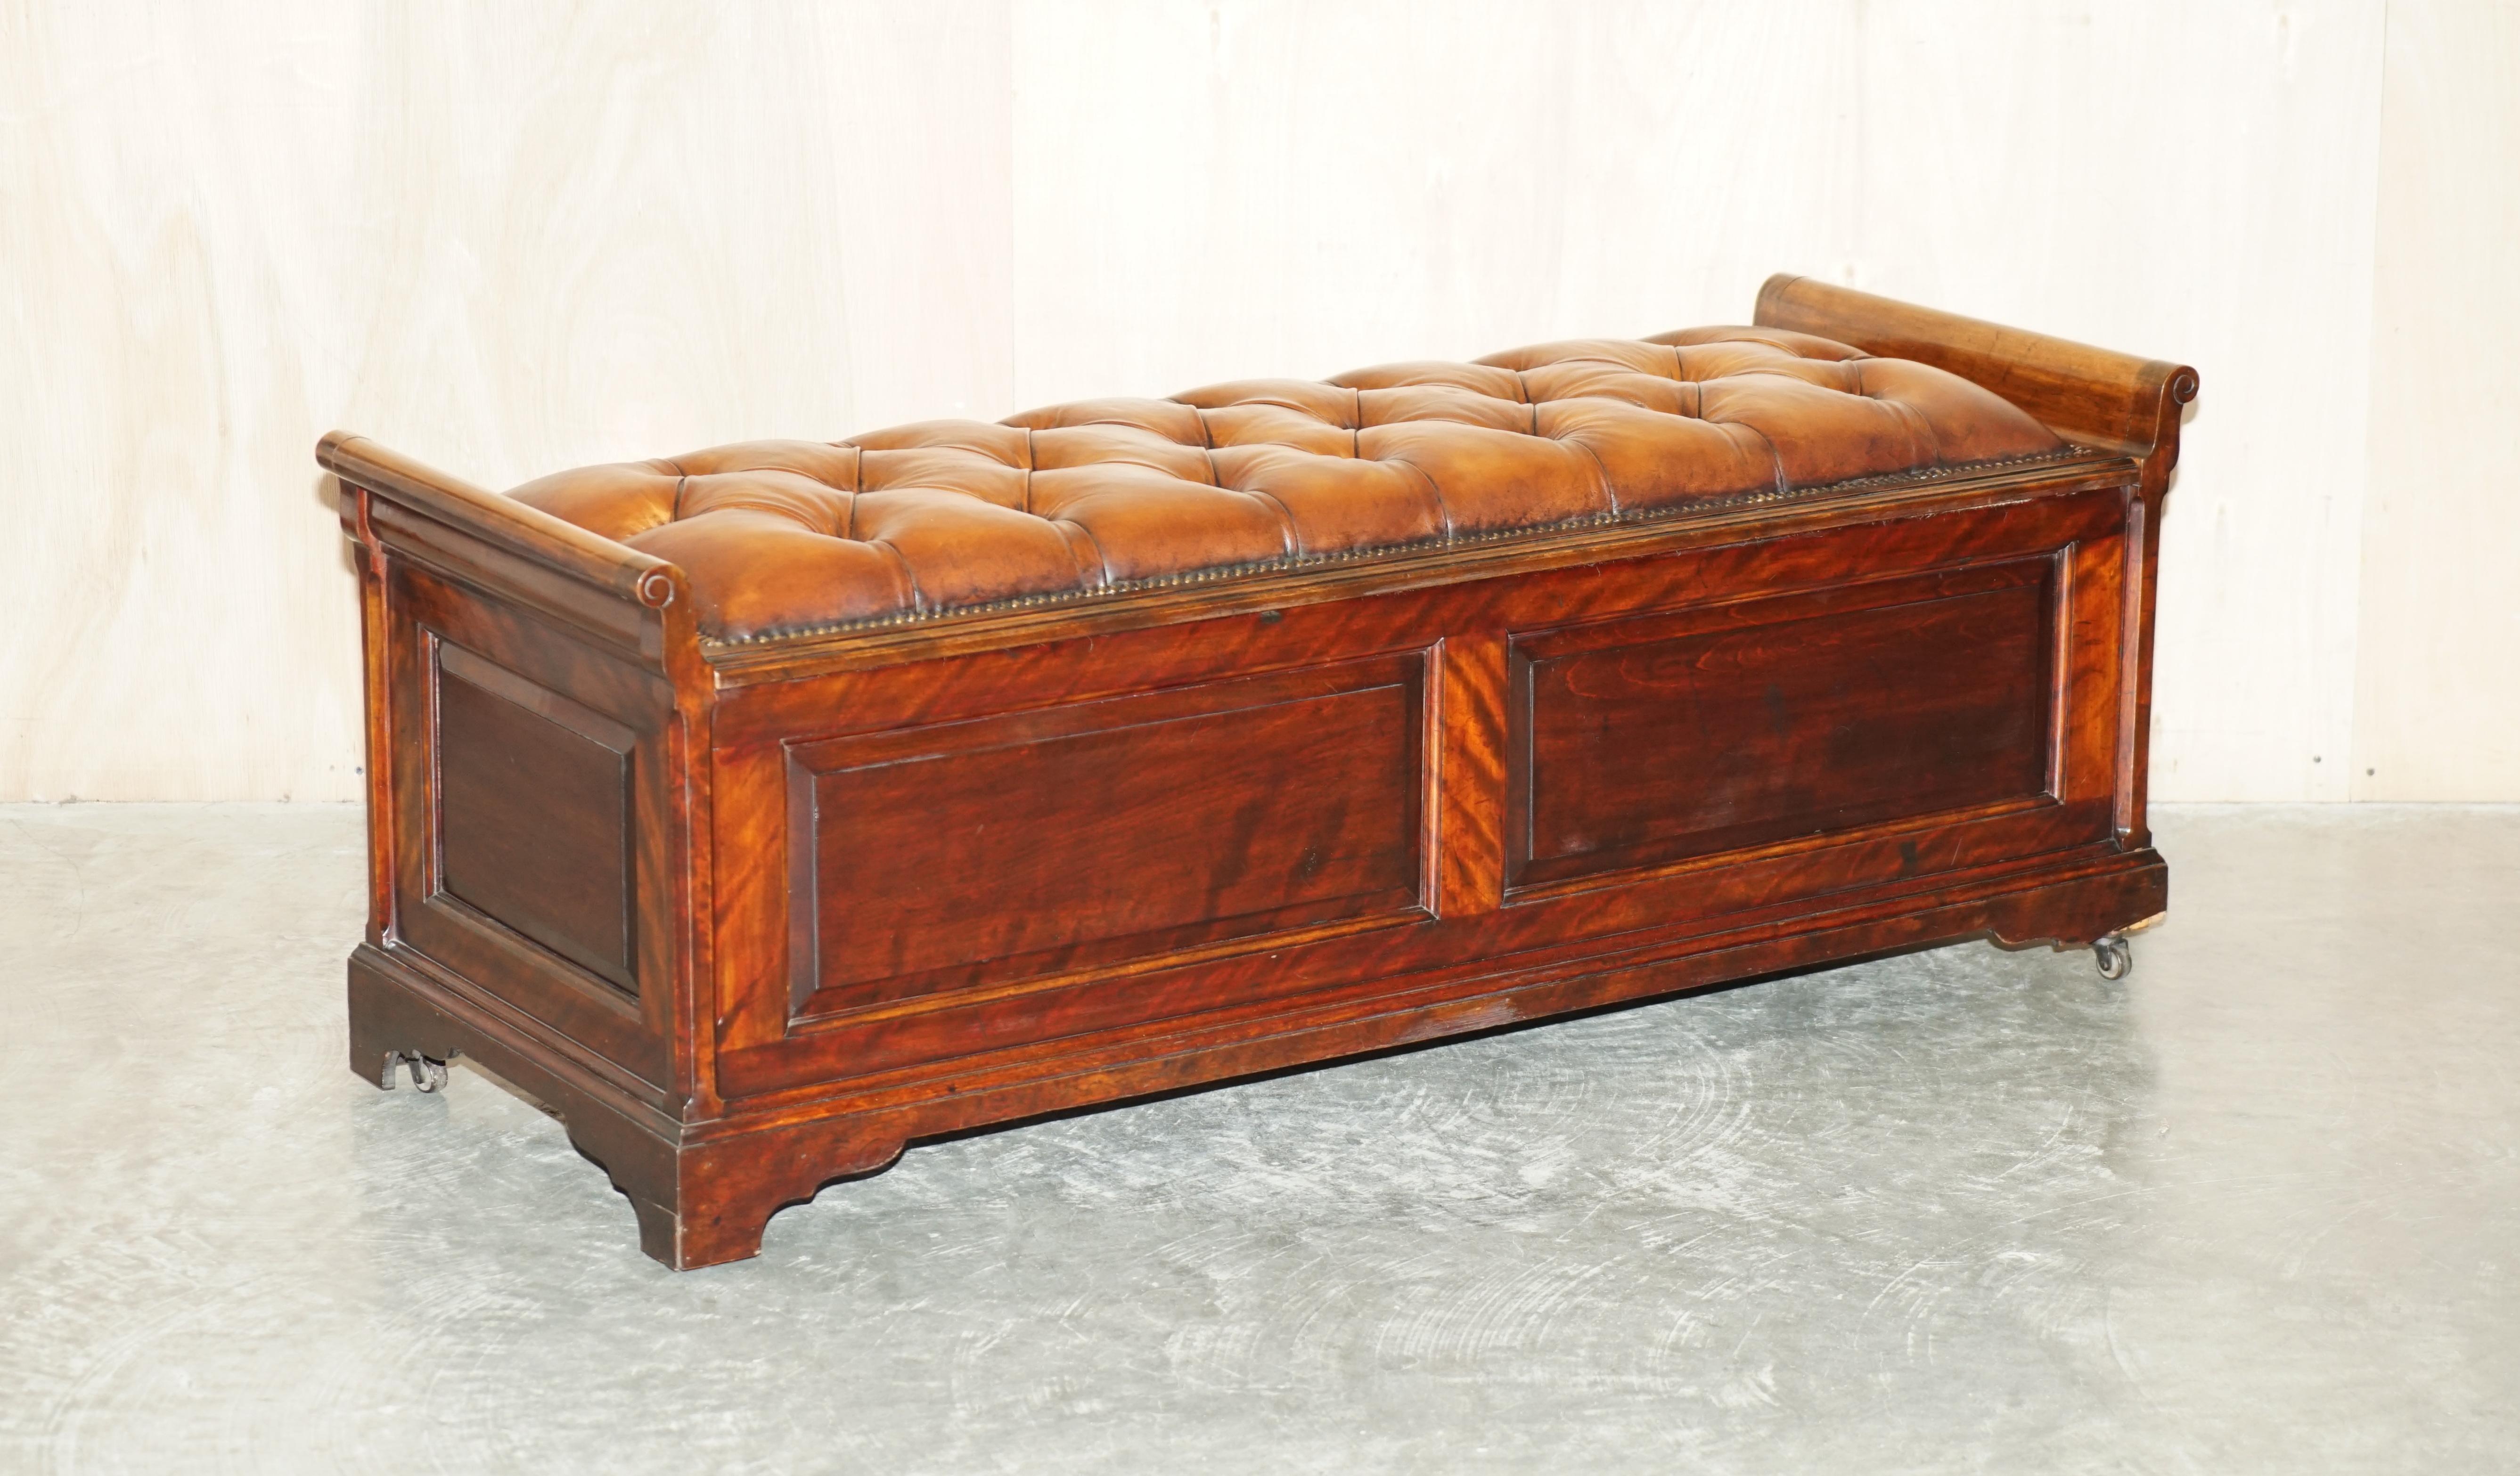 We are delighted to offer for sale this very large, fully restored Victorian circa 1860-1880, hand dyed cigar brown leather hall bench or ottoman with huge amounts of internal storage with the flamed mahogany frame.

This is one of the most